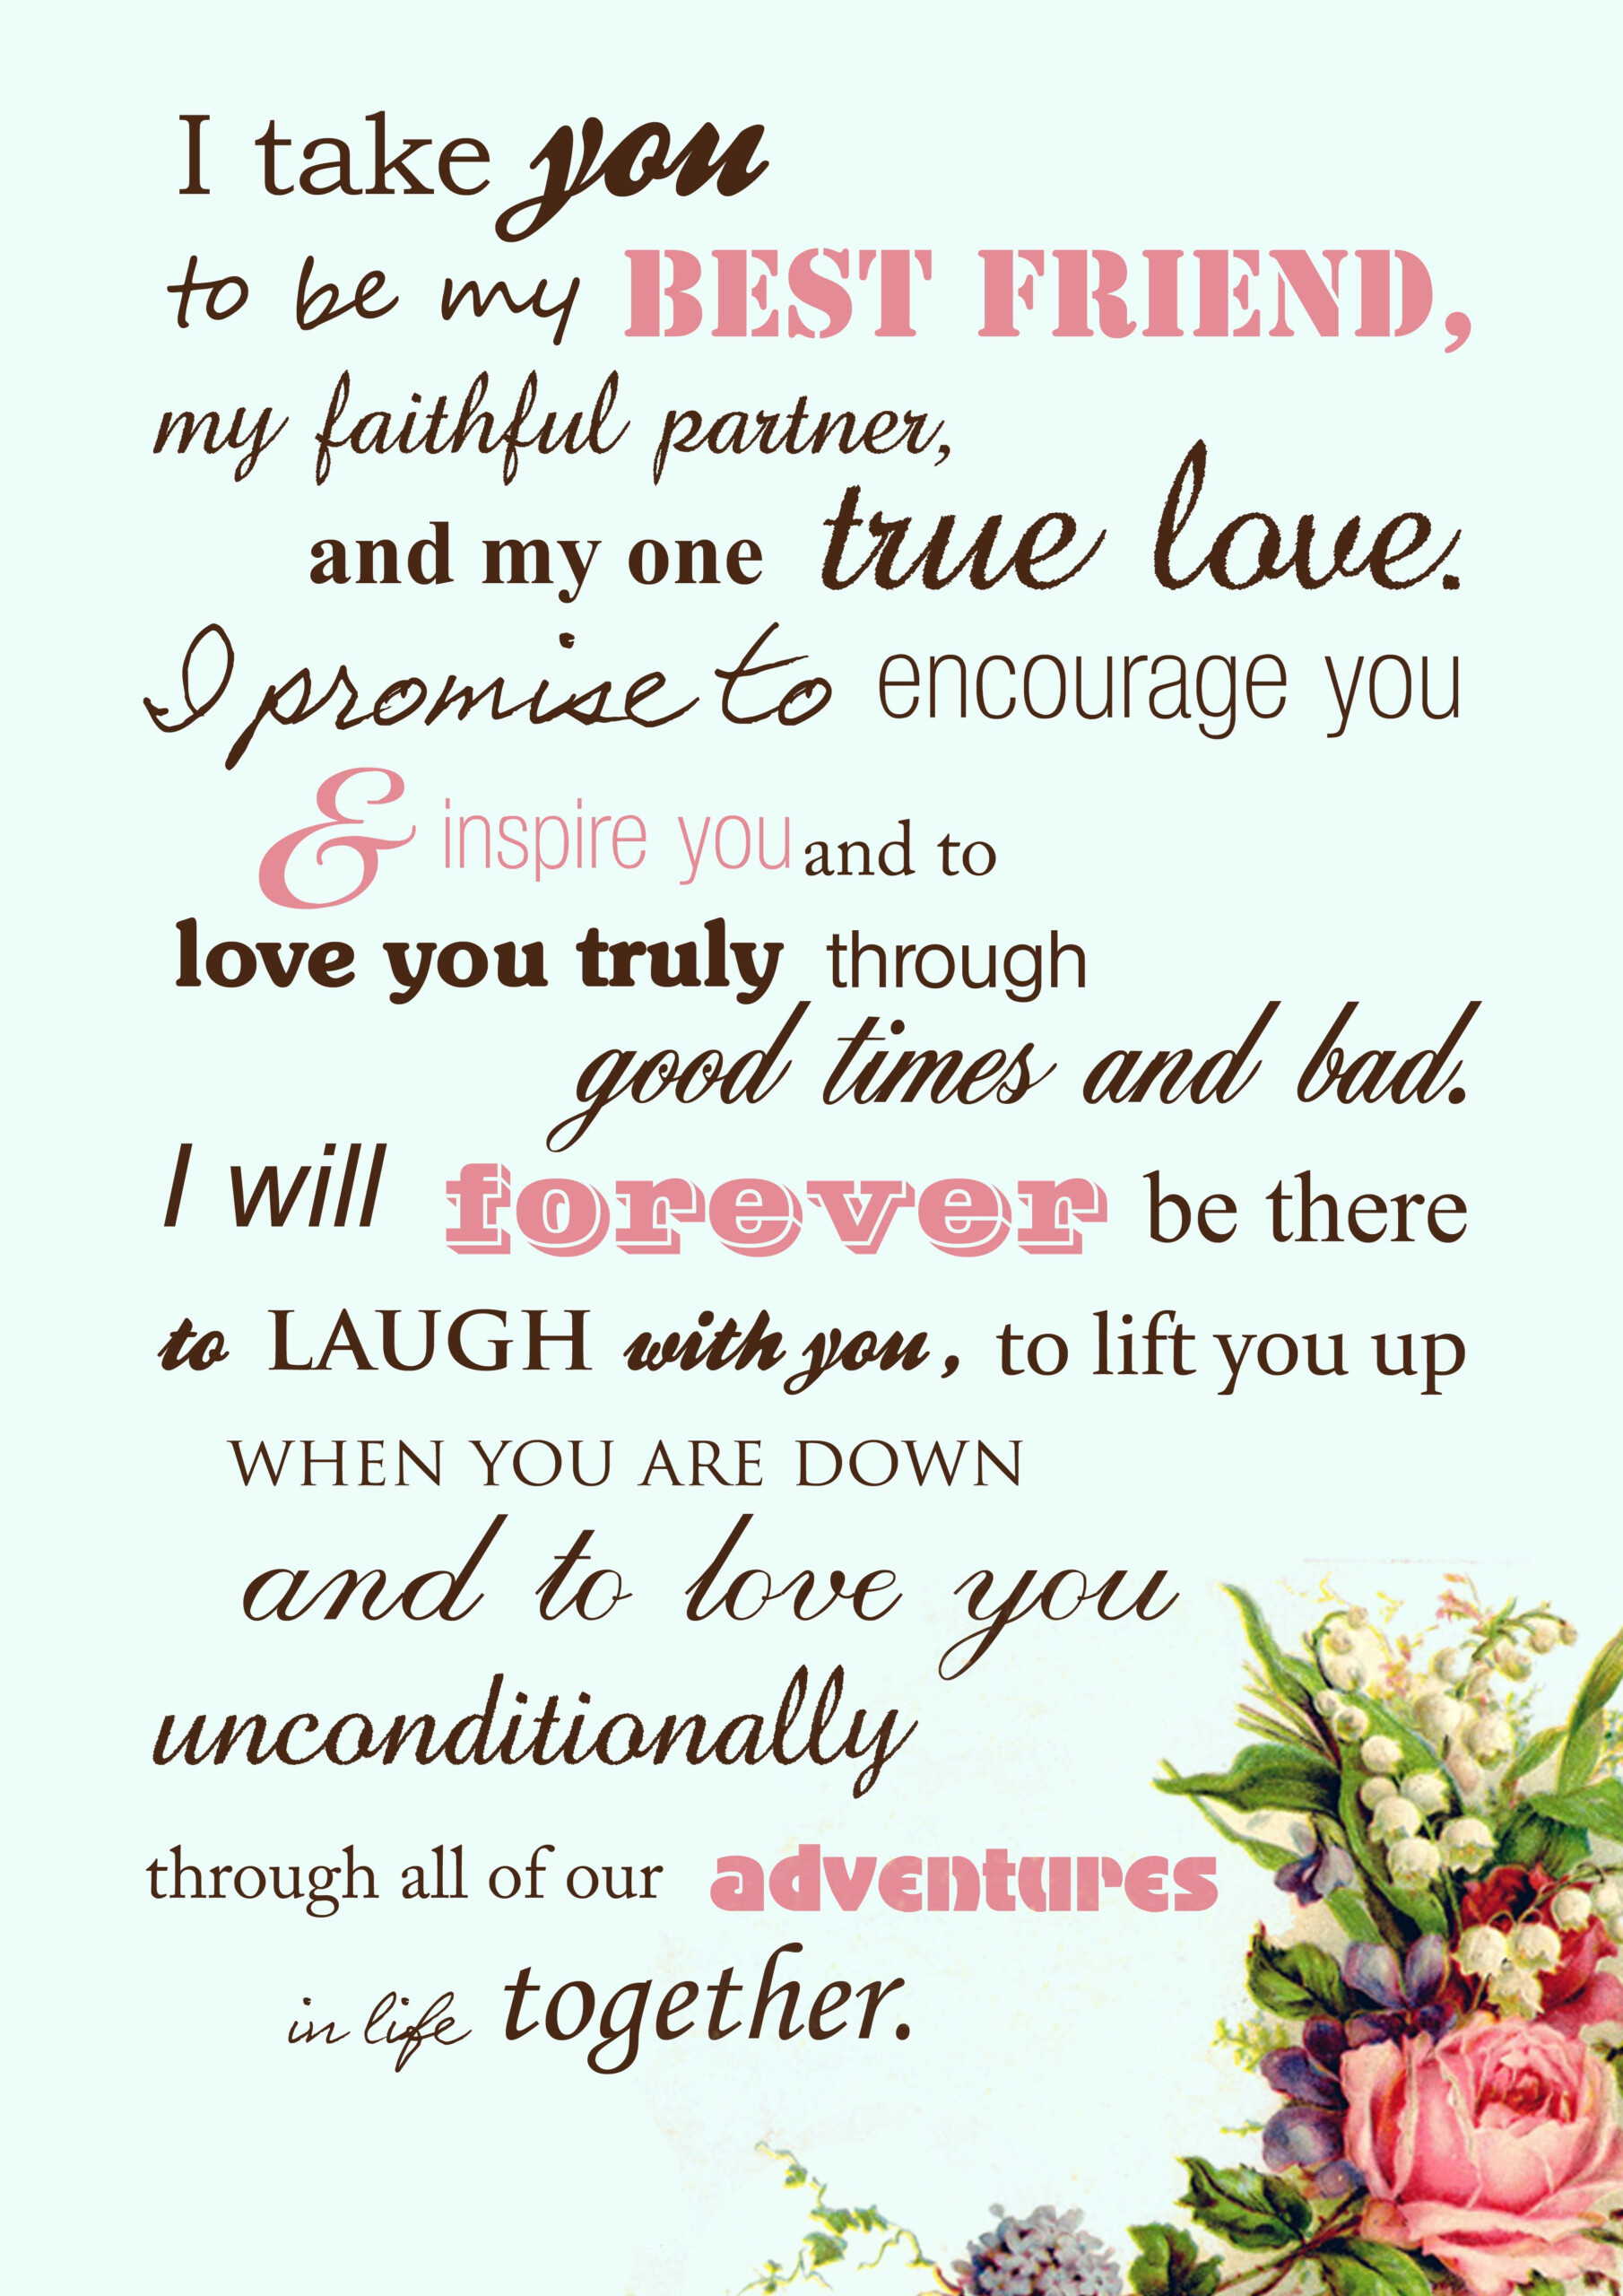 Beautiful Wedding Vows Instead Of The Traditional By The Book Vows